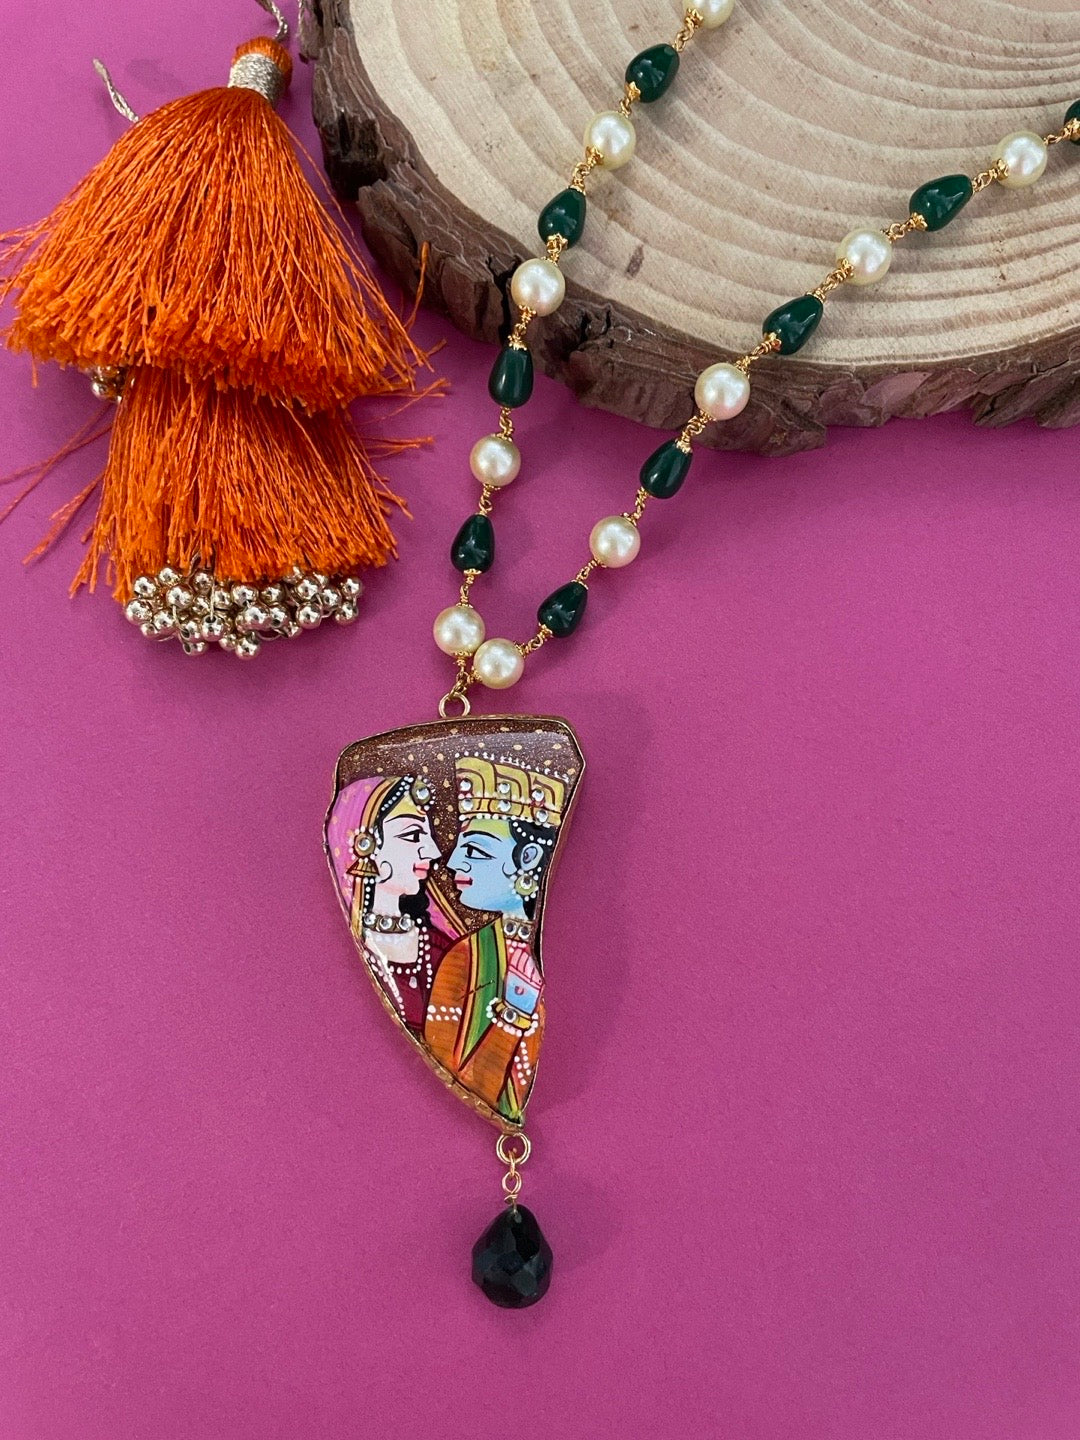 Unique Multi Color Hand-Painted Radha Krishna Pendent Necklace with Green Beads & White Pearls